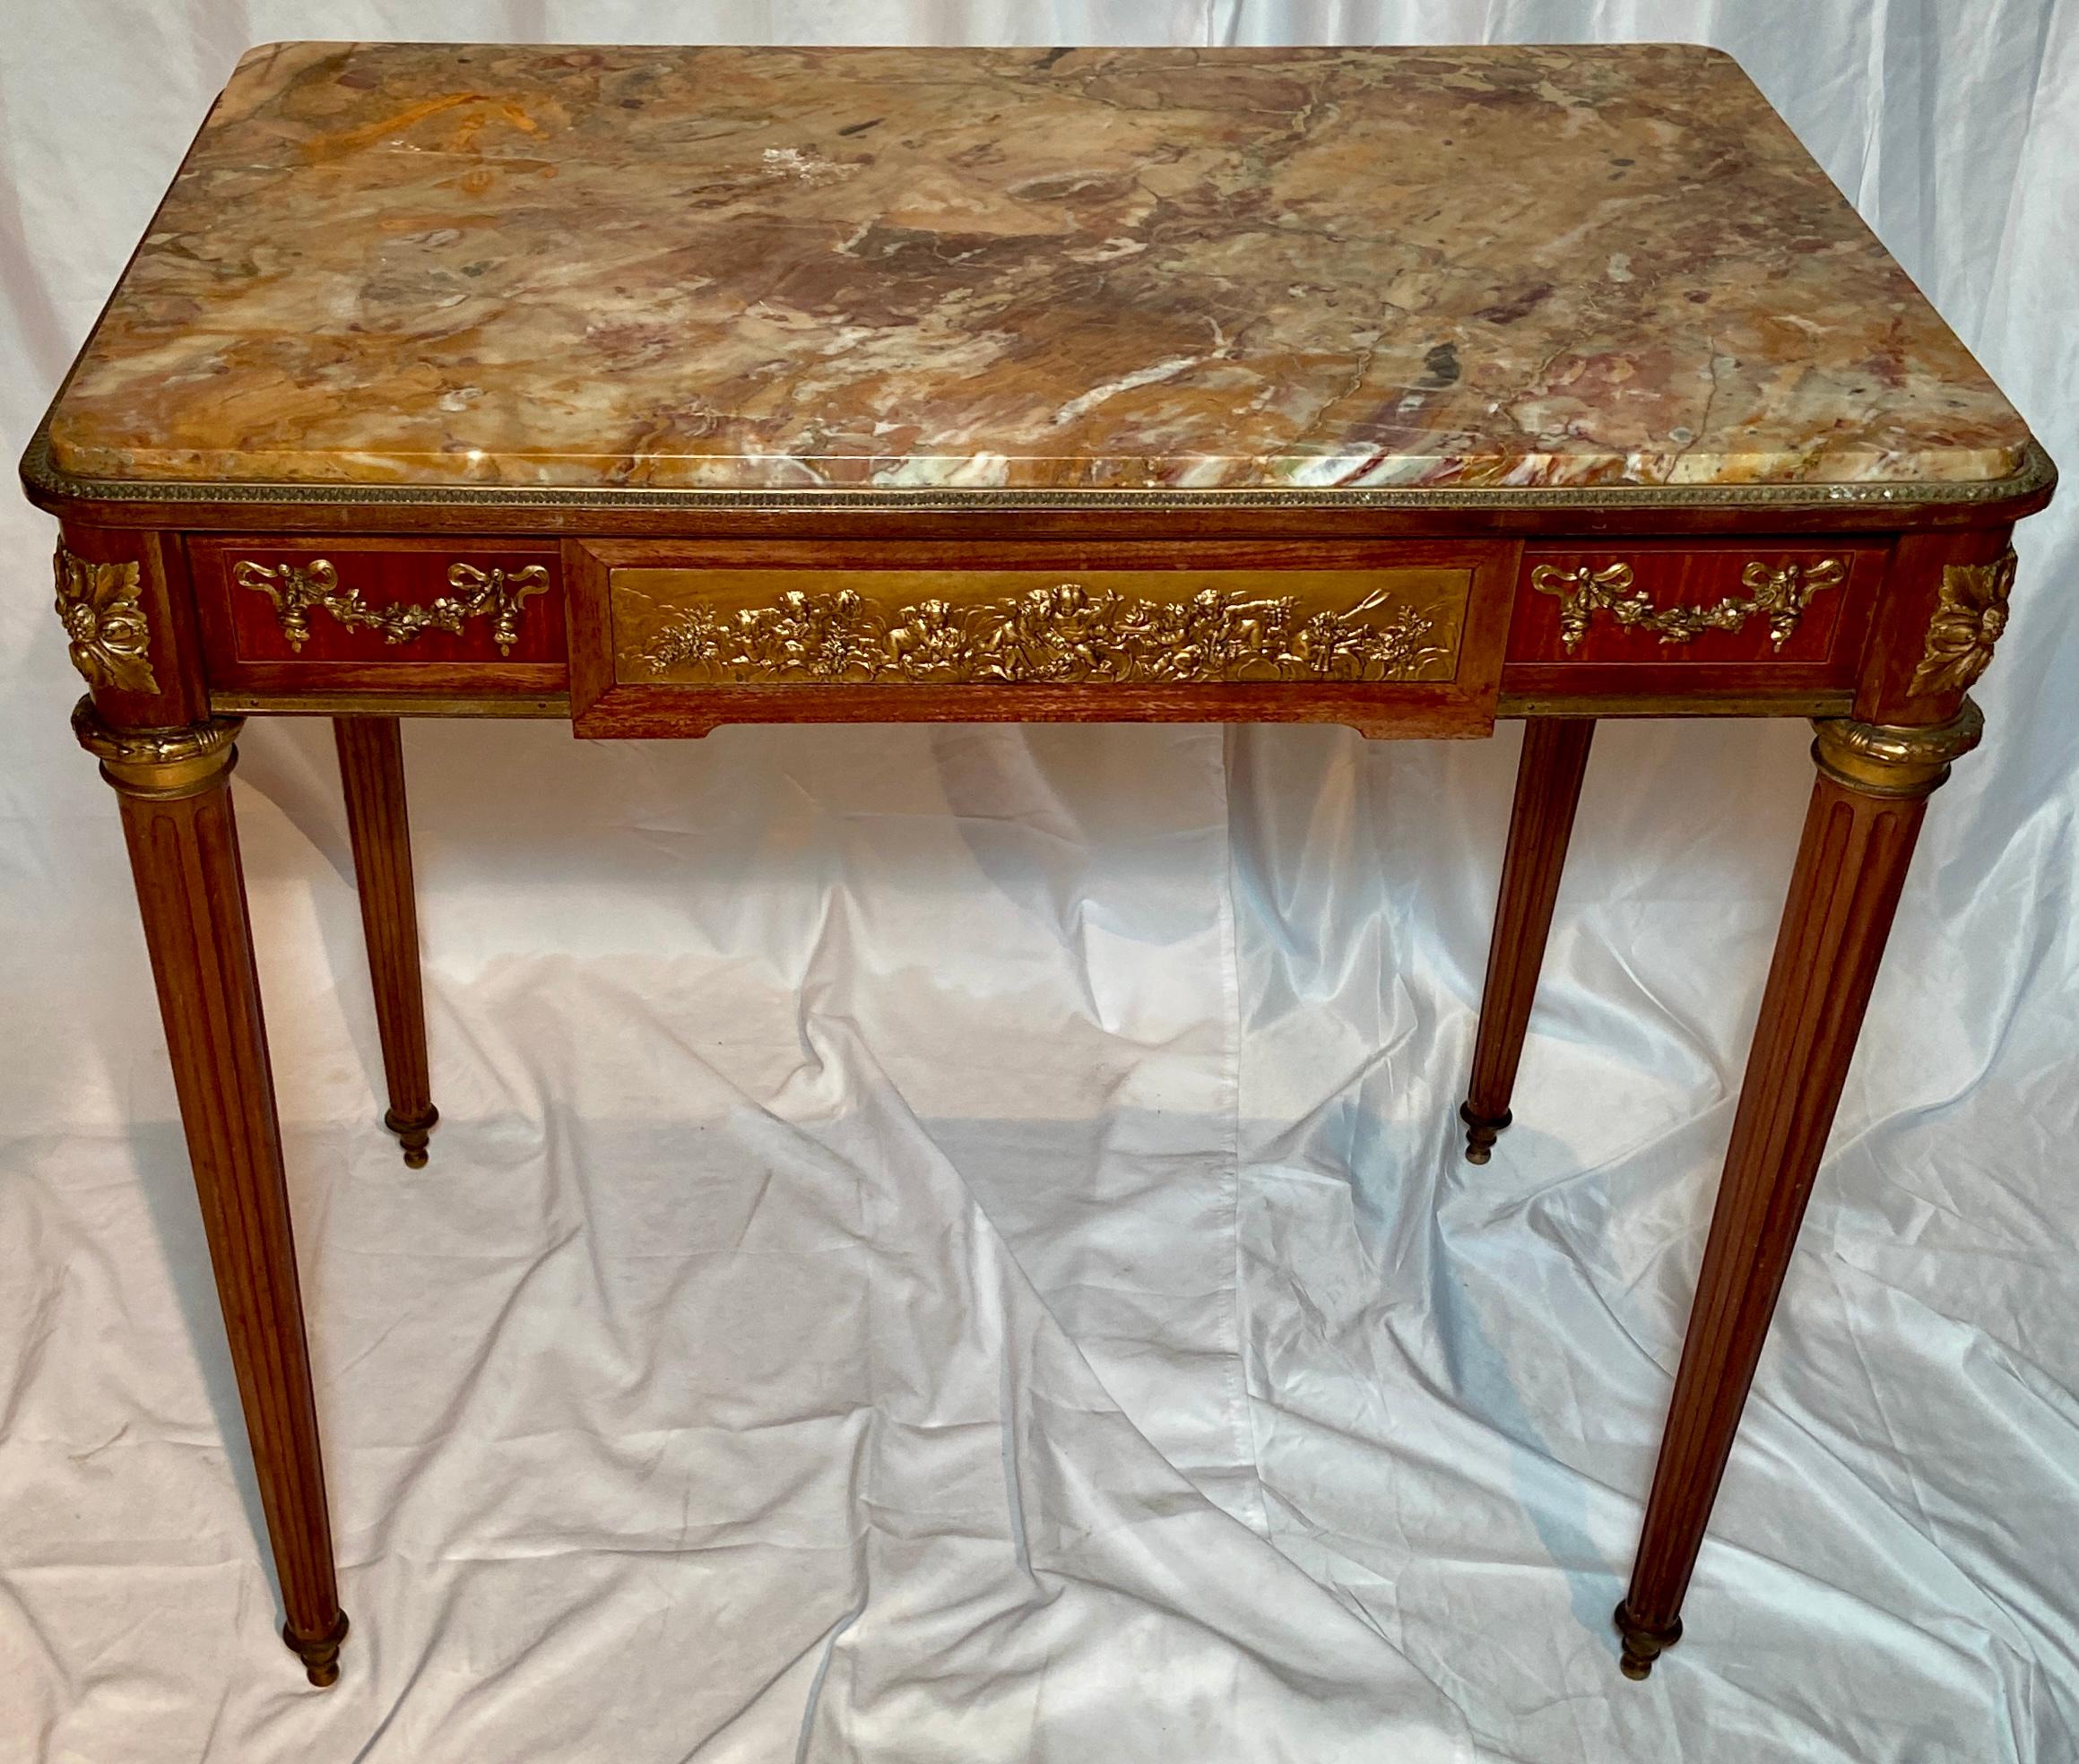 Antique French Louis XVI gold bronze mounted Mahogany marble-top occasional table, Circa 1880.